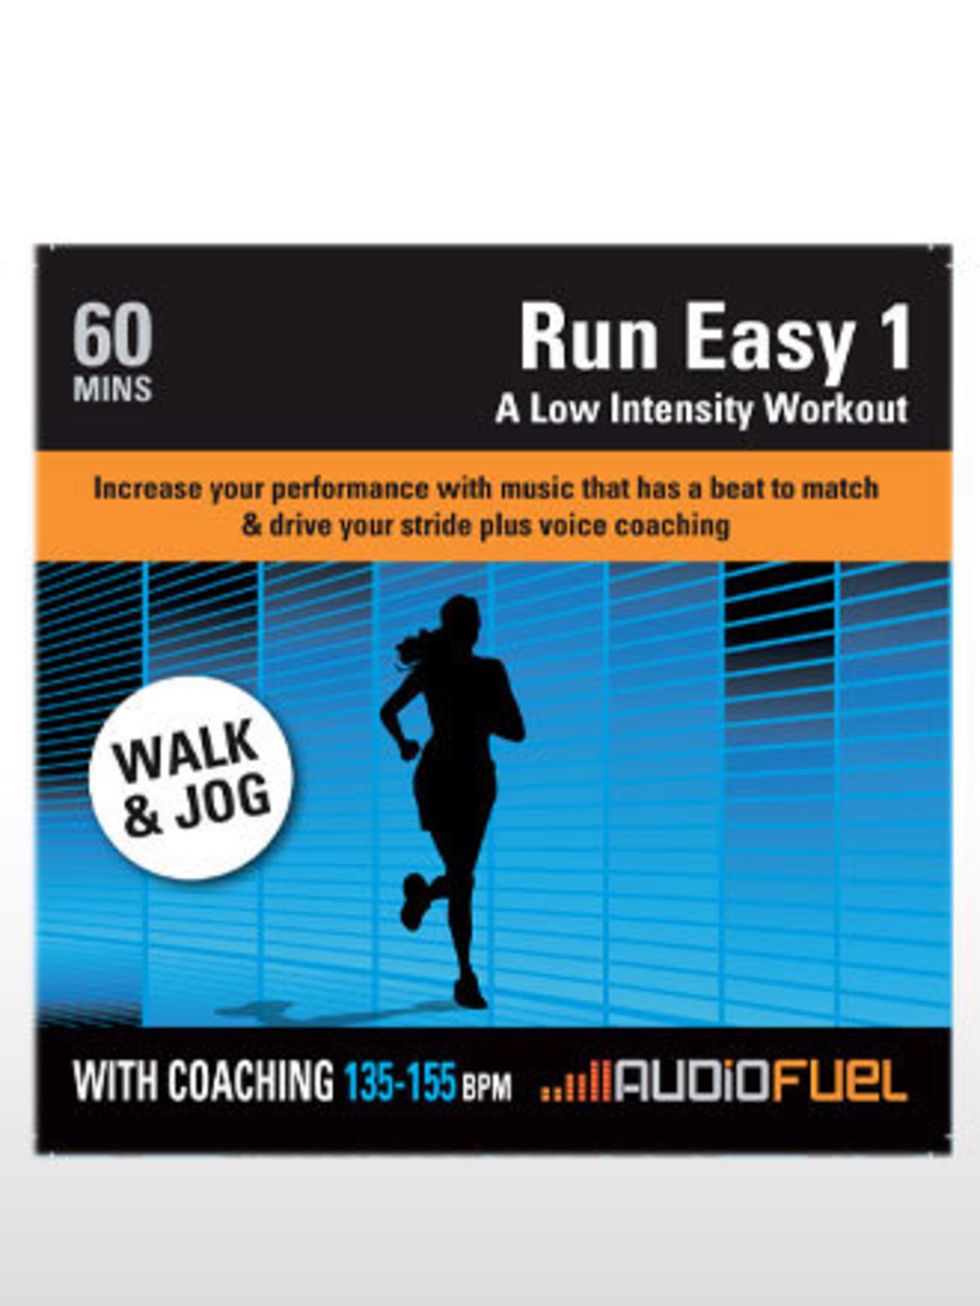 <p>If you have ever gone running and forgot your iPod youll know how important music is to keep you motivated and your pace going strong. AudioFuel takes things one step further by creating soundtracks that help match the beat of the music to your stride